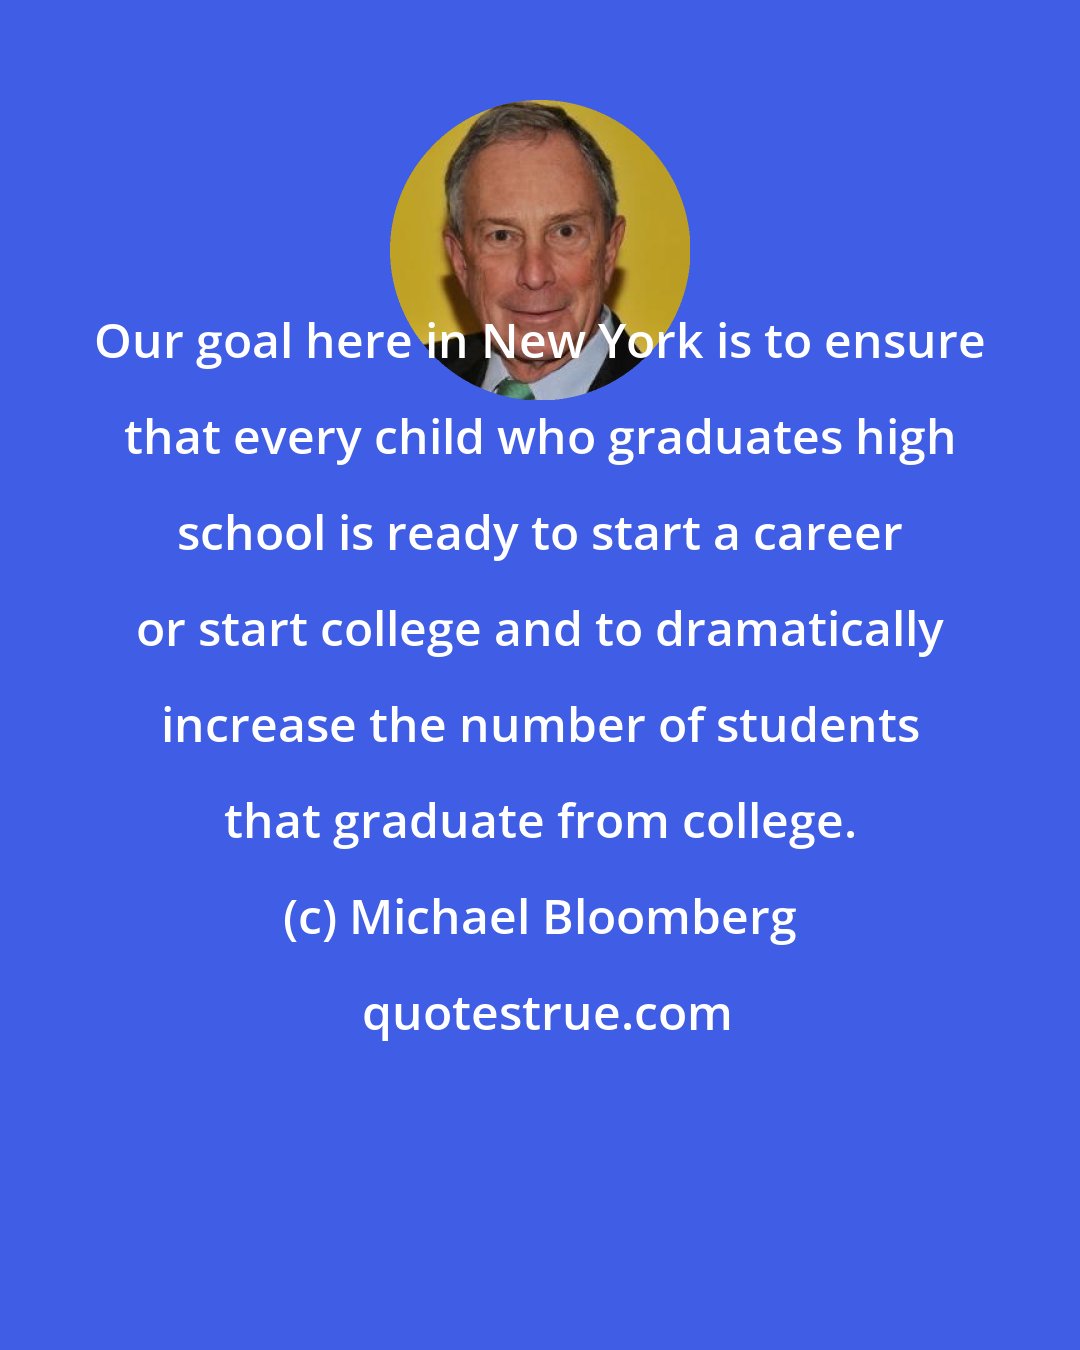 Michael Bloomberg: Our goal here in New York is to ensure that every child who graduates high school is ready to start a career or start college and to dramatically increase the number of students that graduate from college.